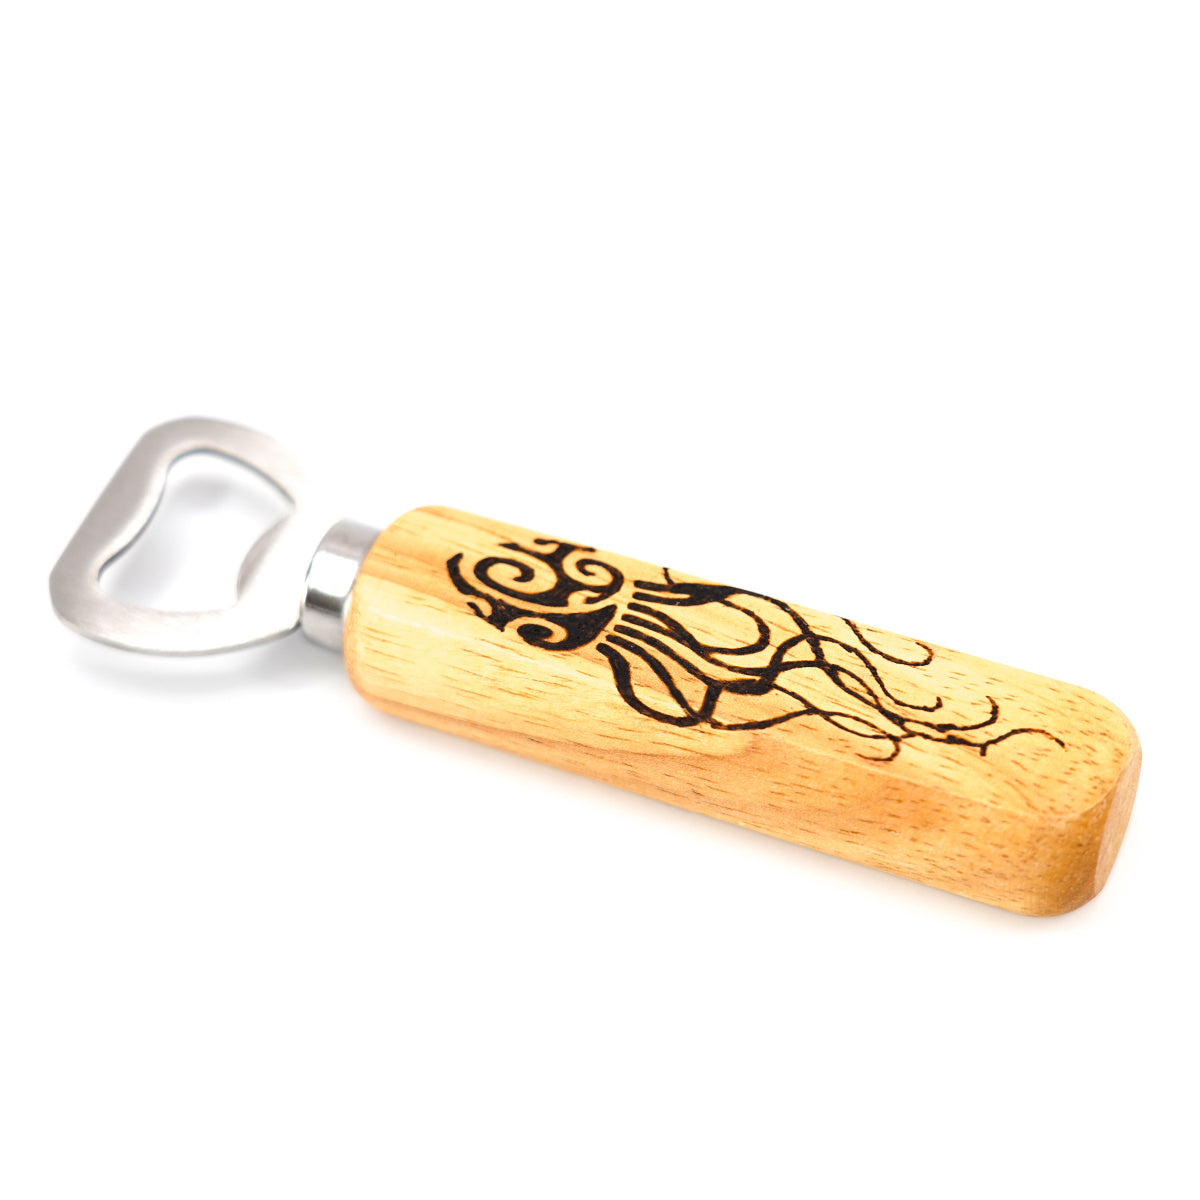 Wood and Stainless Steel Bottle Opener - Jellyfish